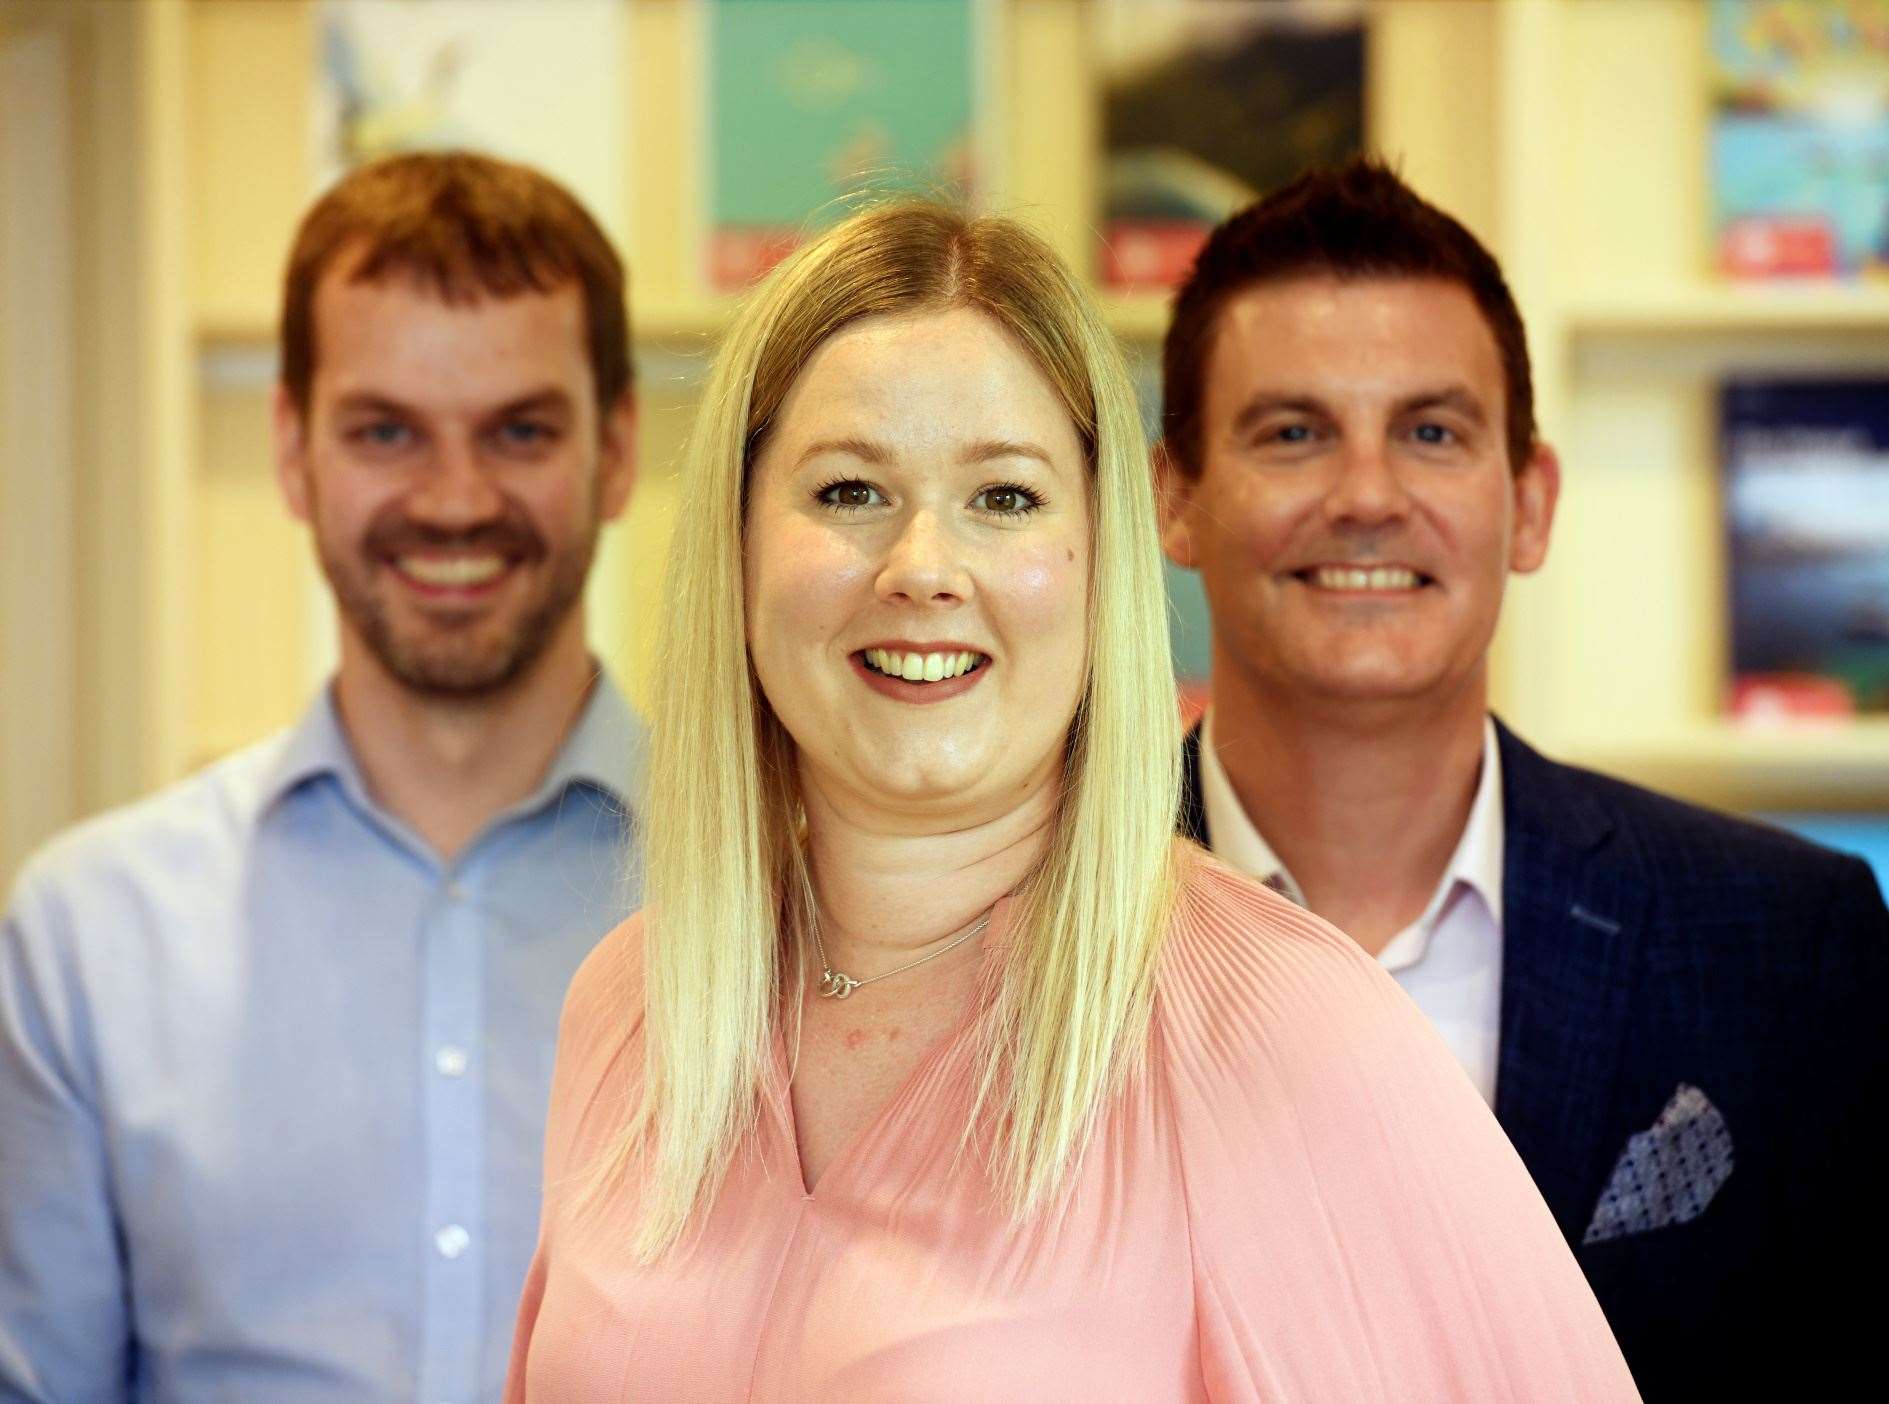 Ross Sharrott, Executive Manager, Aimee Morgan, Branch Manager and Scott Murray, Owner. Picture: James Mackenzie.